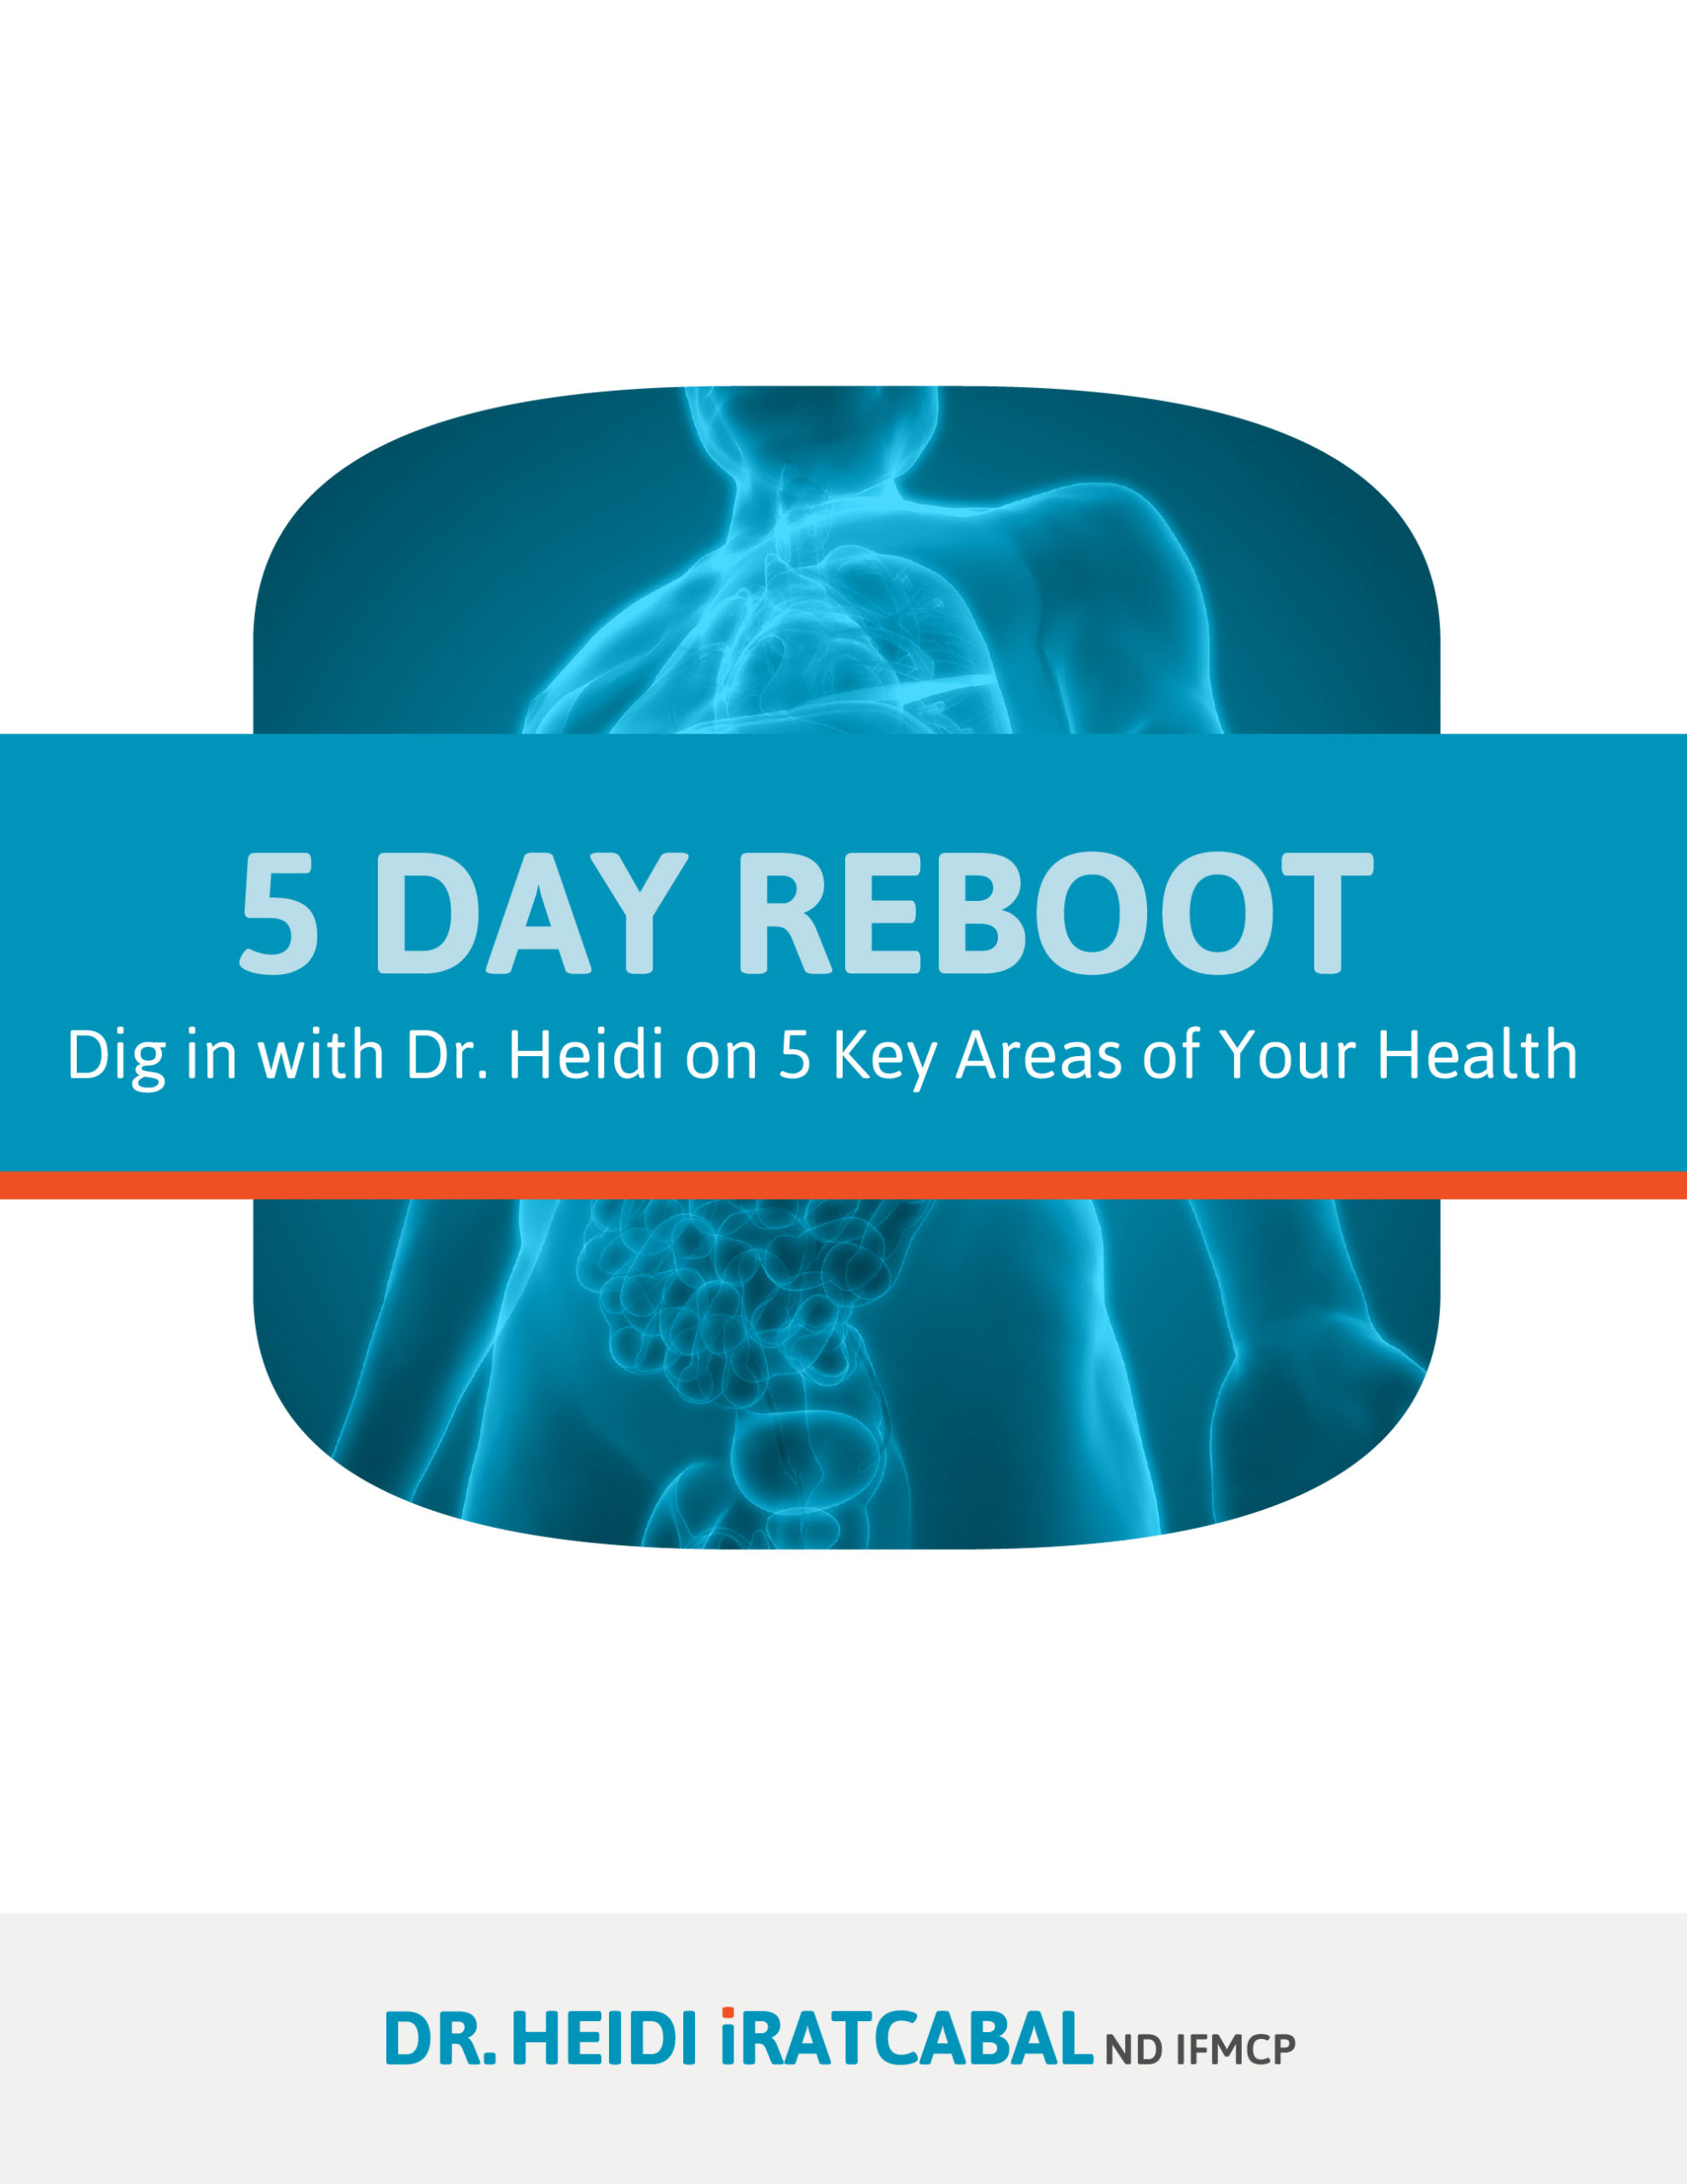 5 Day Reboot: Dig in with Dr. Heidi on 5 Key Areas of your Health